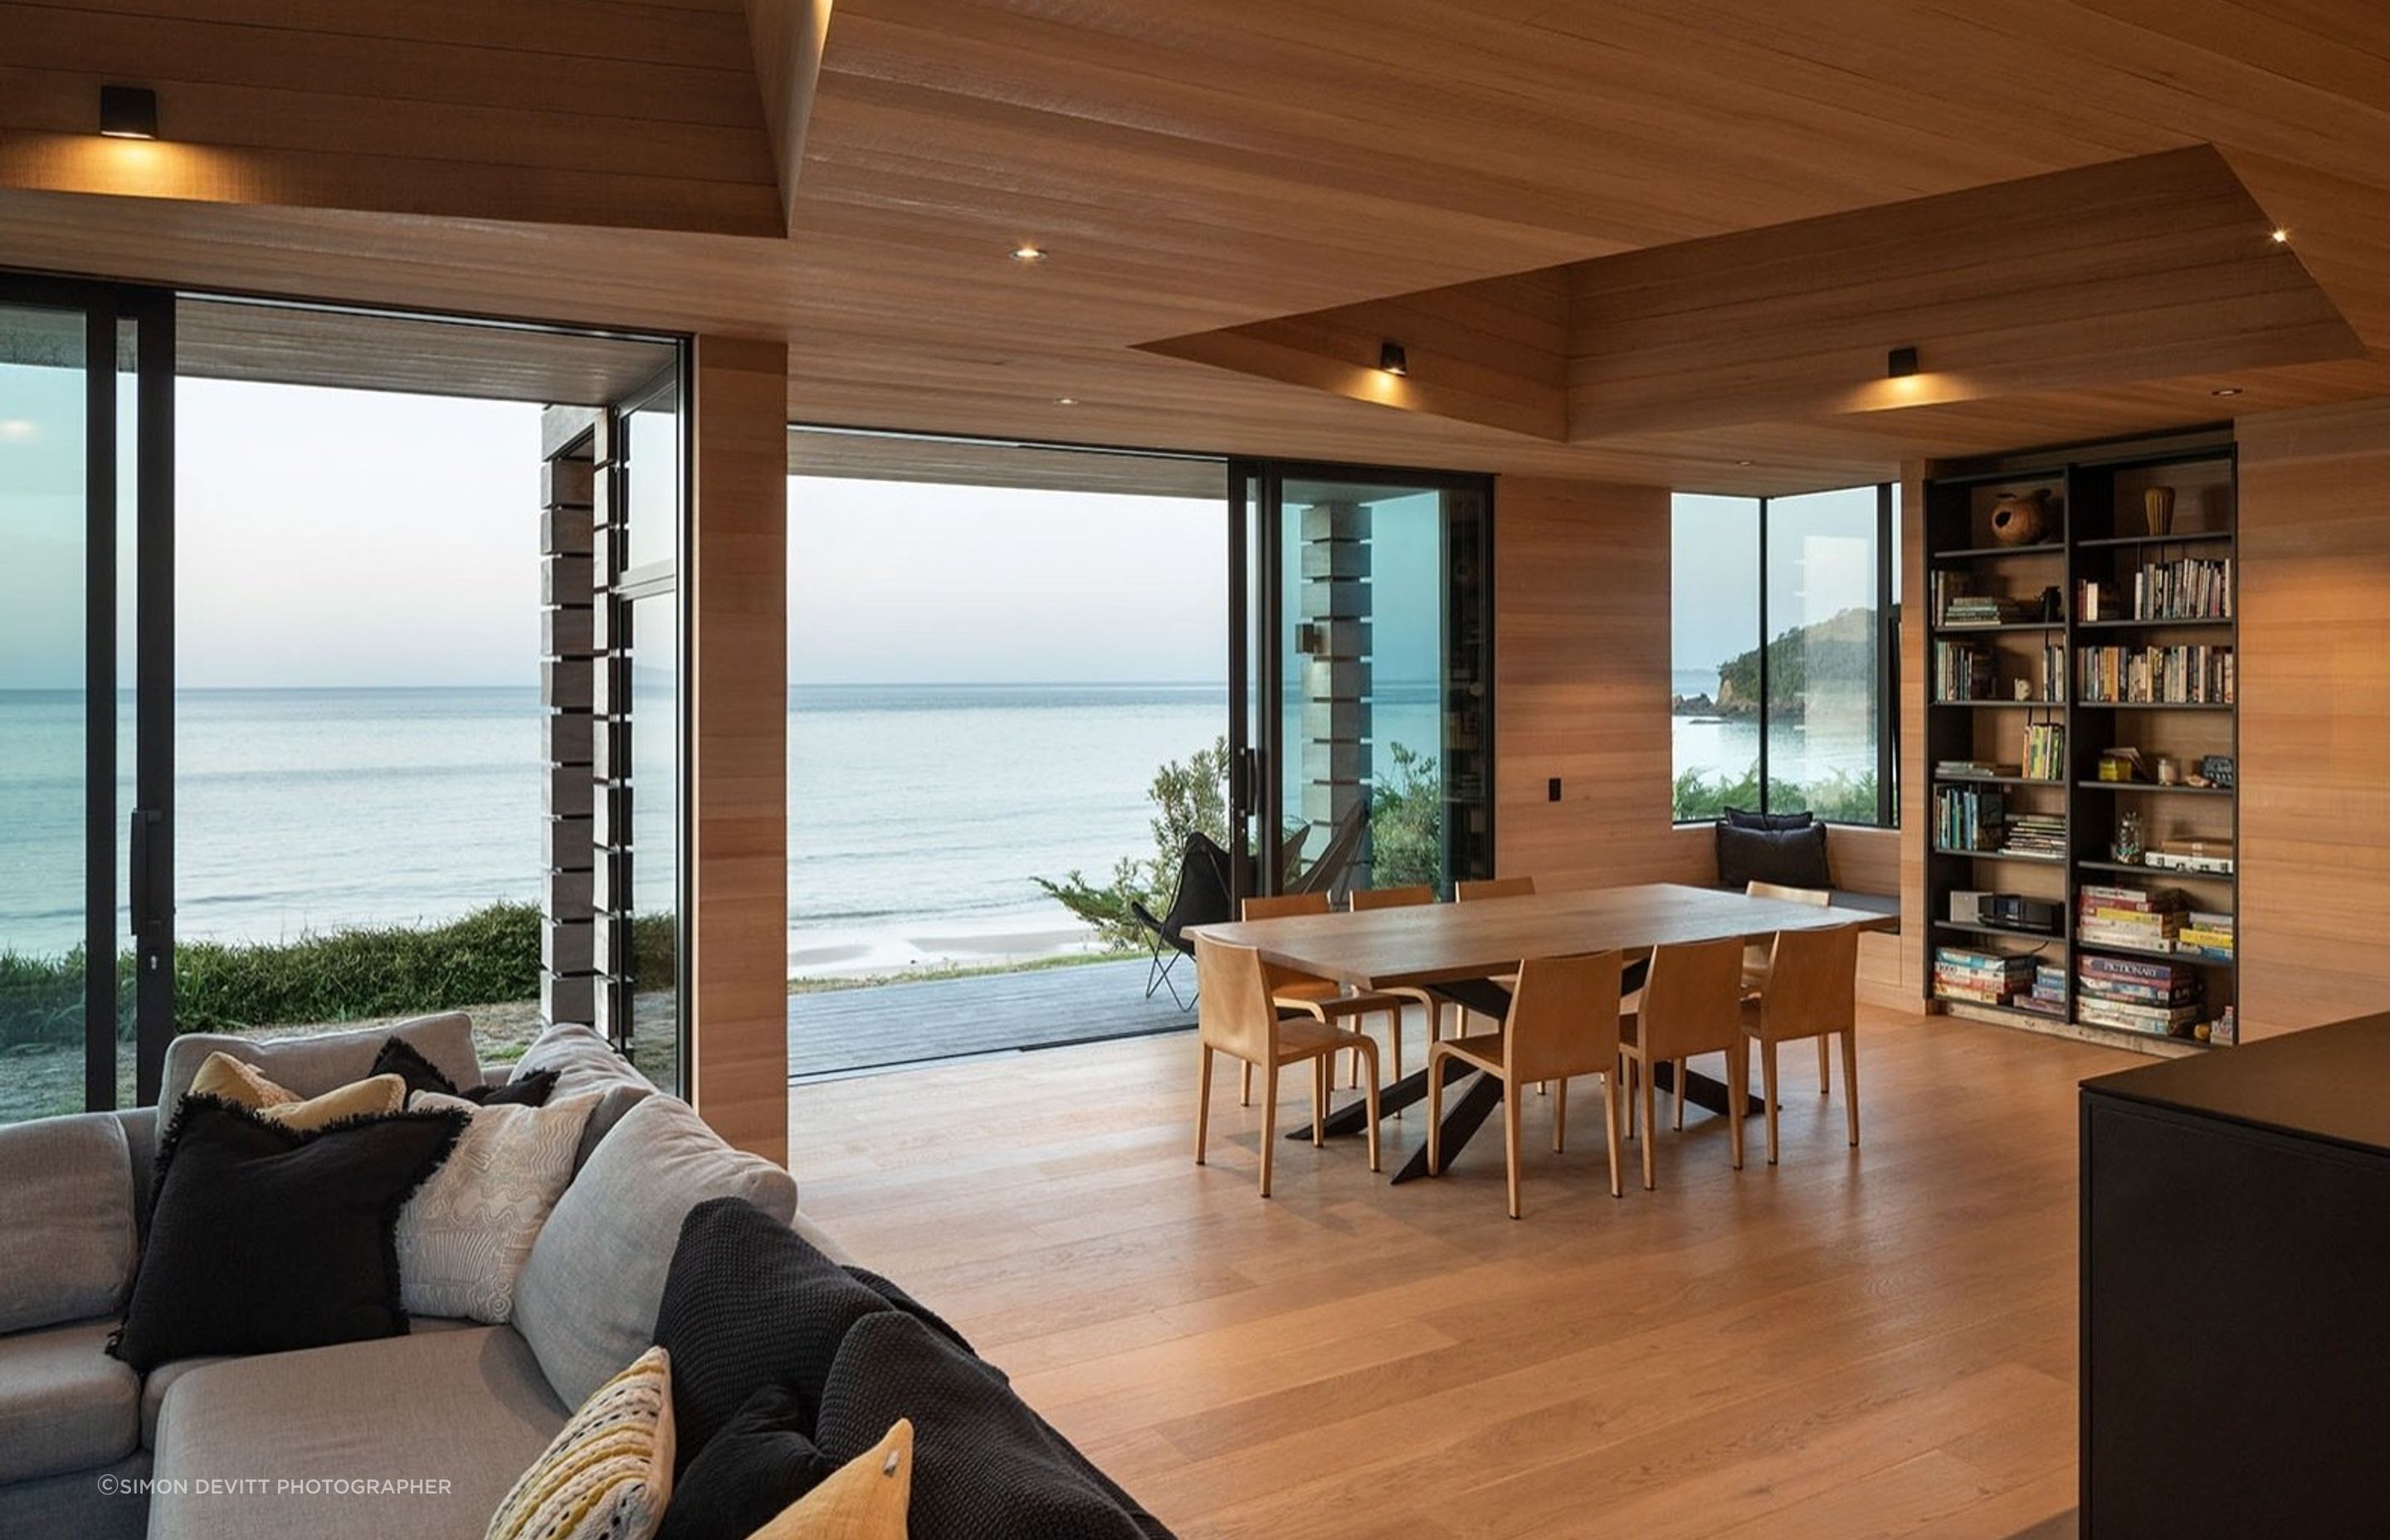 The kitchen, dining and living areas sit at the top of the dune, opening onto a courtyard overlooking the ocean.